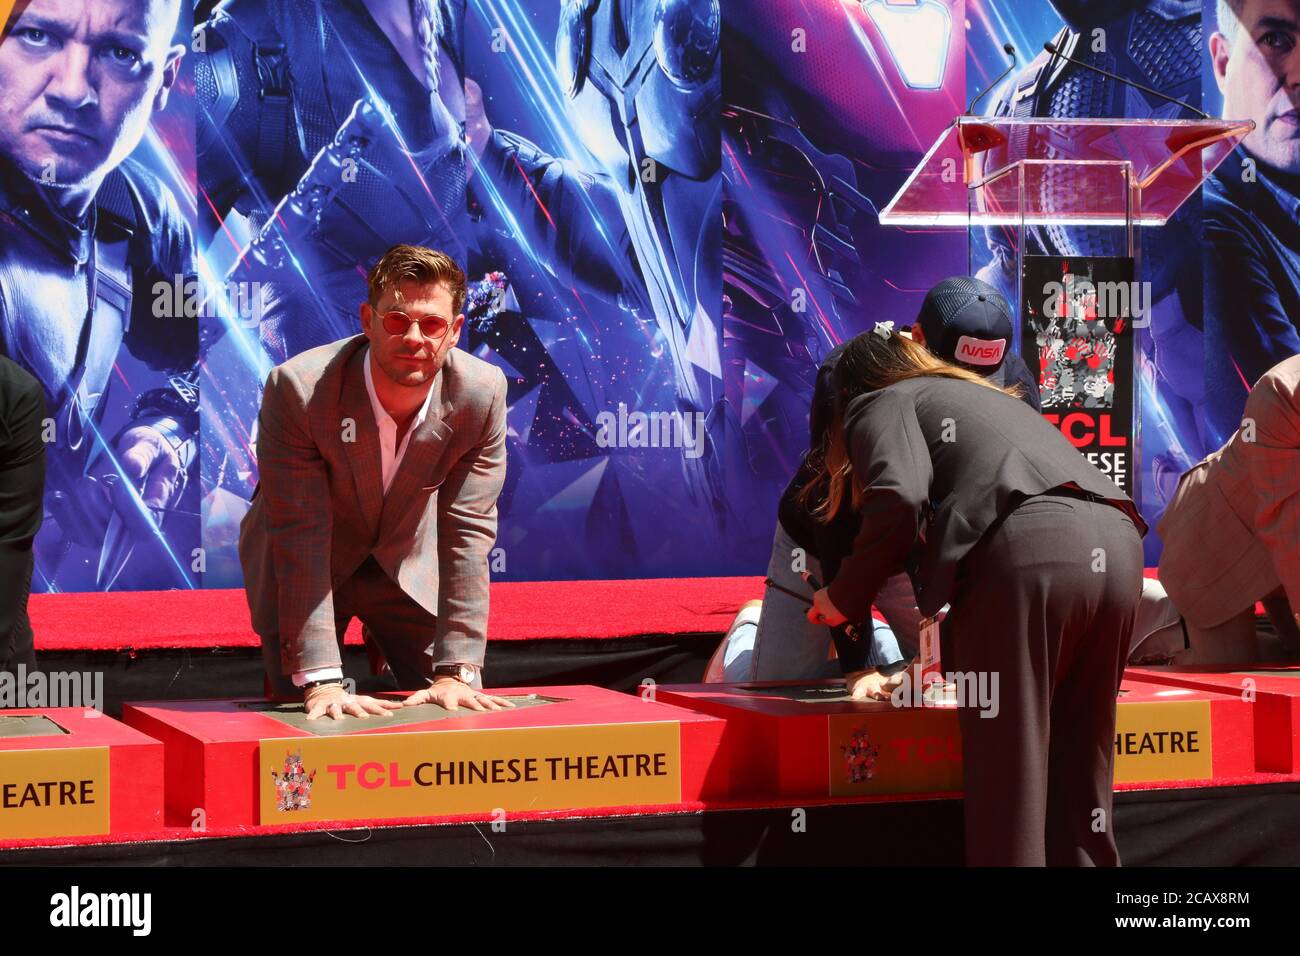 LOS ANGELES - APR 23:  Chris Hemsworth, Chris Evans at the Avengers Cast Members Handprint Ceremony at the TCL Chinese Theater on April 23, 2019 in Los Angeles, CA Stock Photo